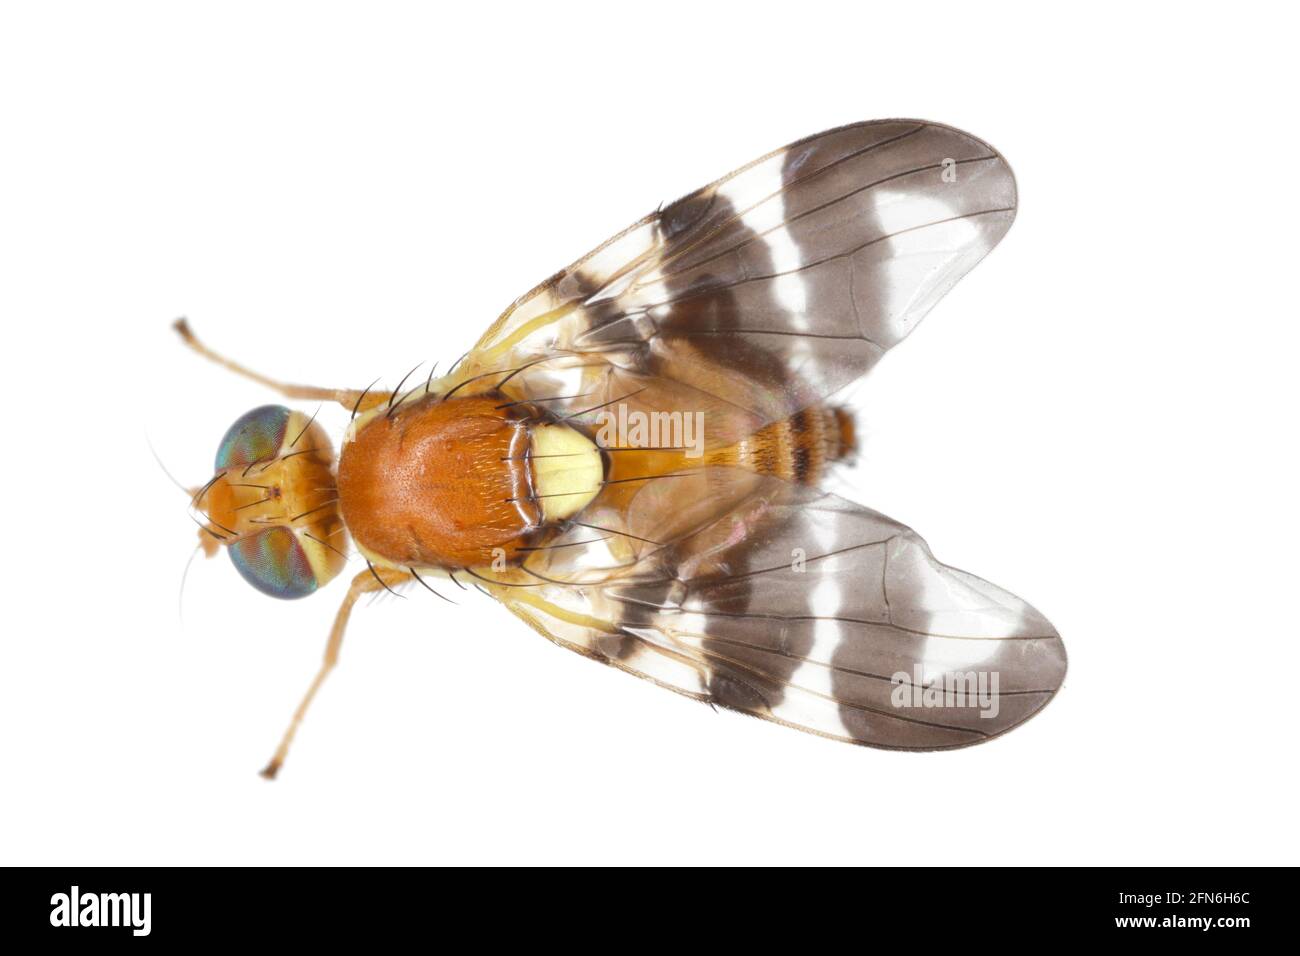 Walnut husk fly (Rhagoletis completa) it is quarantine species of tephritid or fruit flies whose larvae damage walnuts. Isolated on a white background Stock Photo